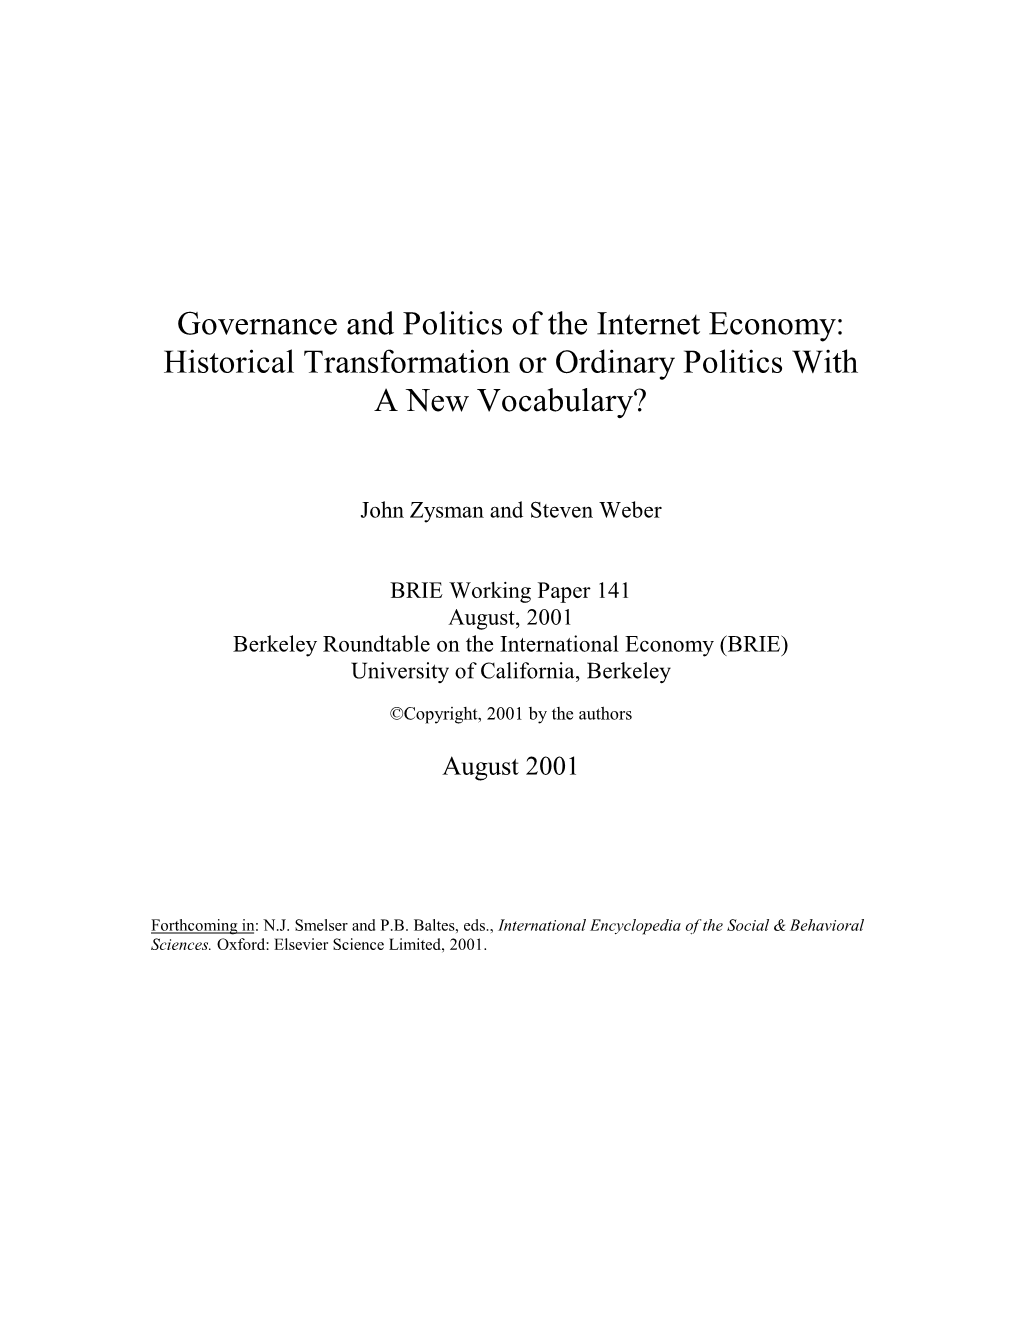 Governance and Politics of the Internet Economy: Historical Transformation Or Ordinary Politics with a New Vocabulary?